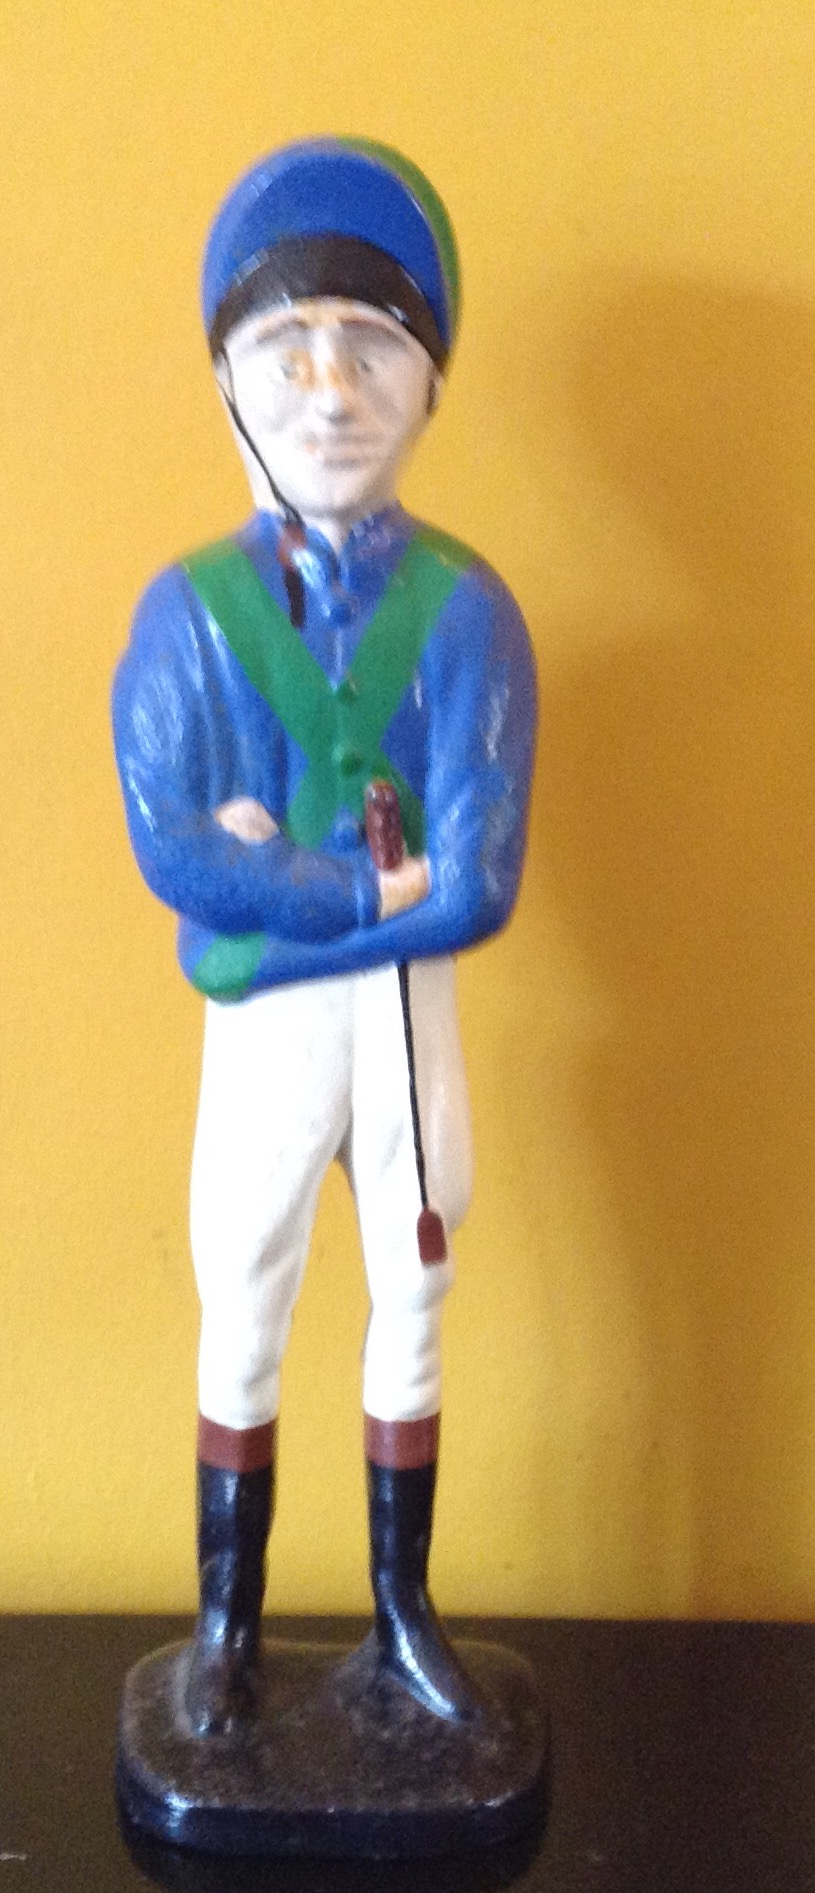 A 20TH CENTURY CAST IRON DOORSTOP Formed as a jockey, wearing blue and green silks and a helmet.